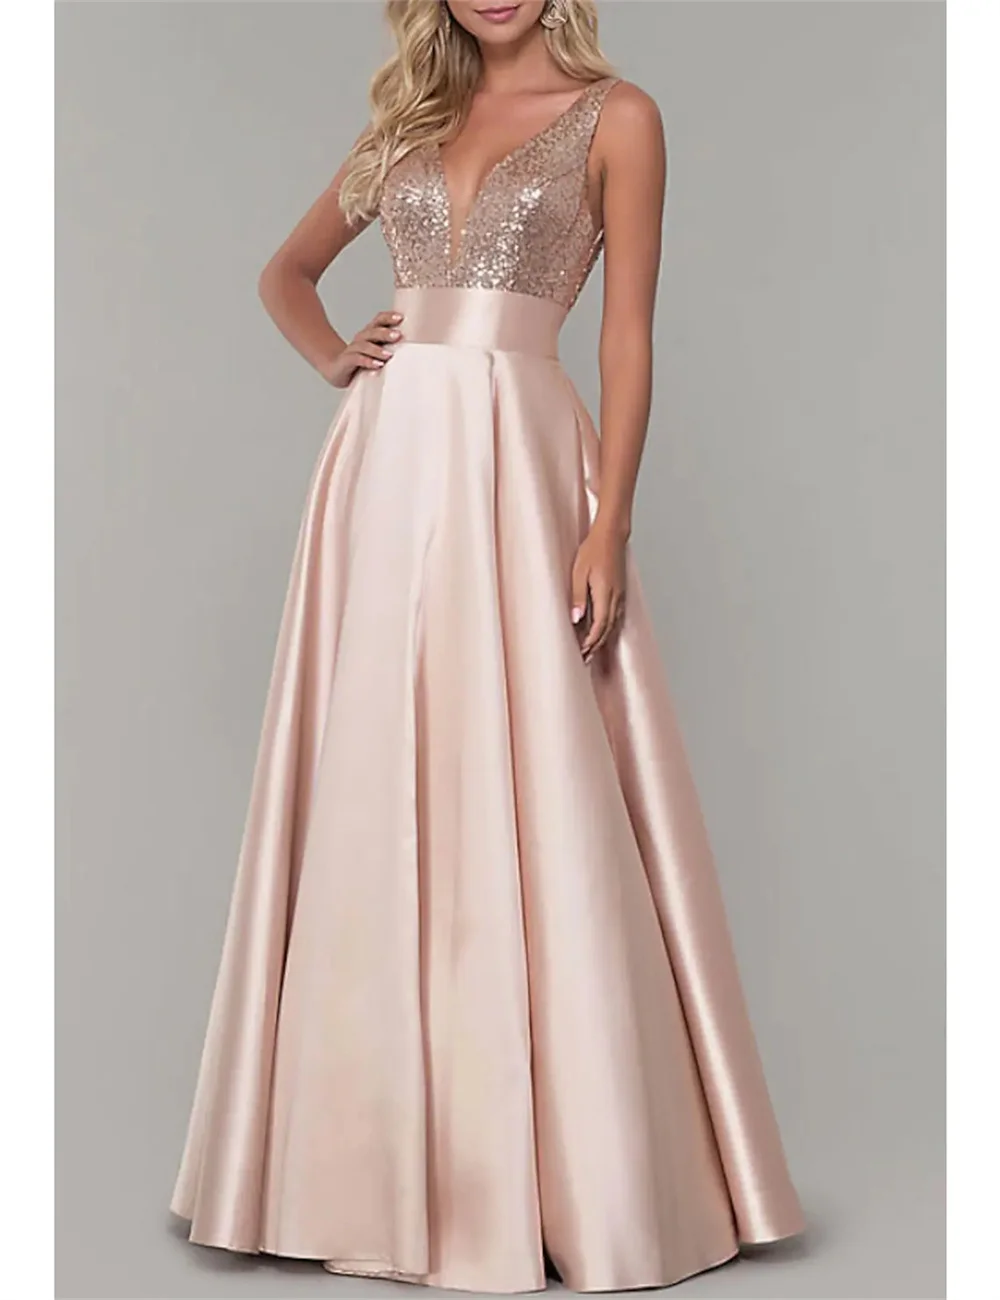 

Elegant Luxury Long A-Line Prom Dress Formal Occasion Party Wear V-Neck Spaghetti Strap Floor Length Satin with Pleats Sequined